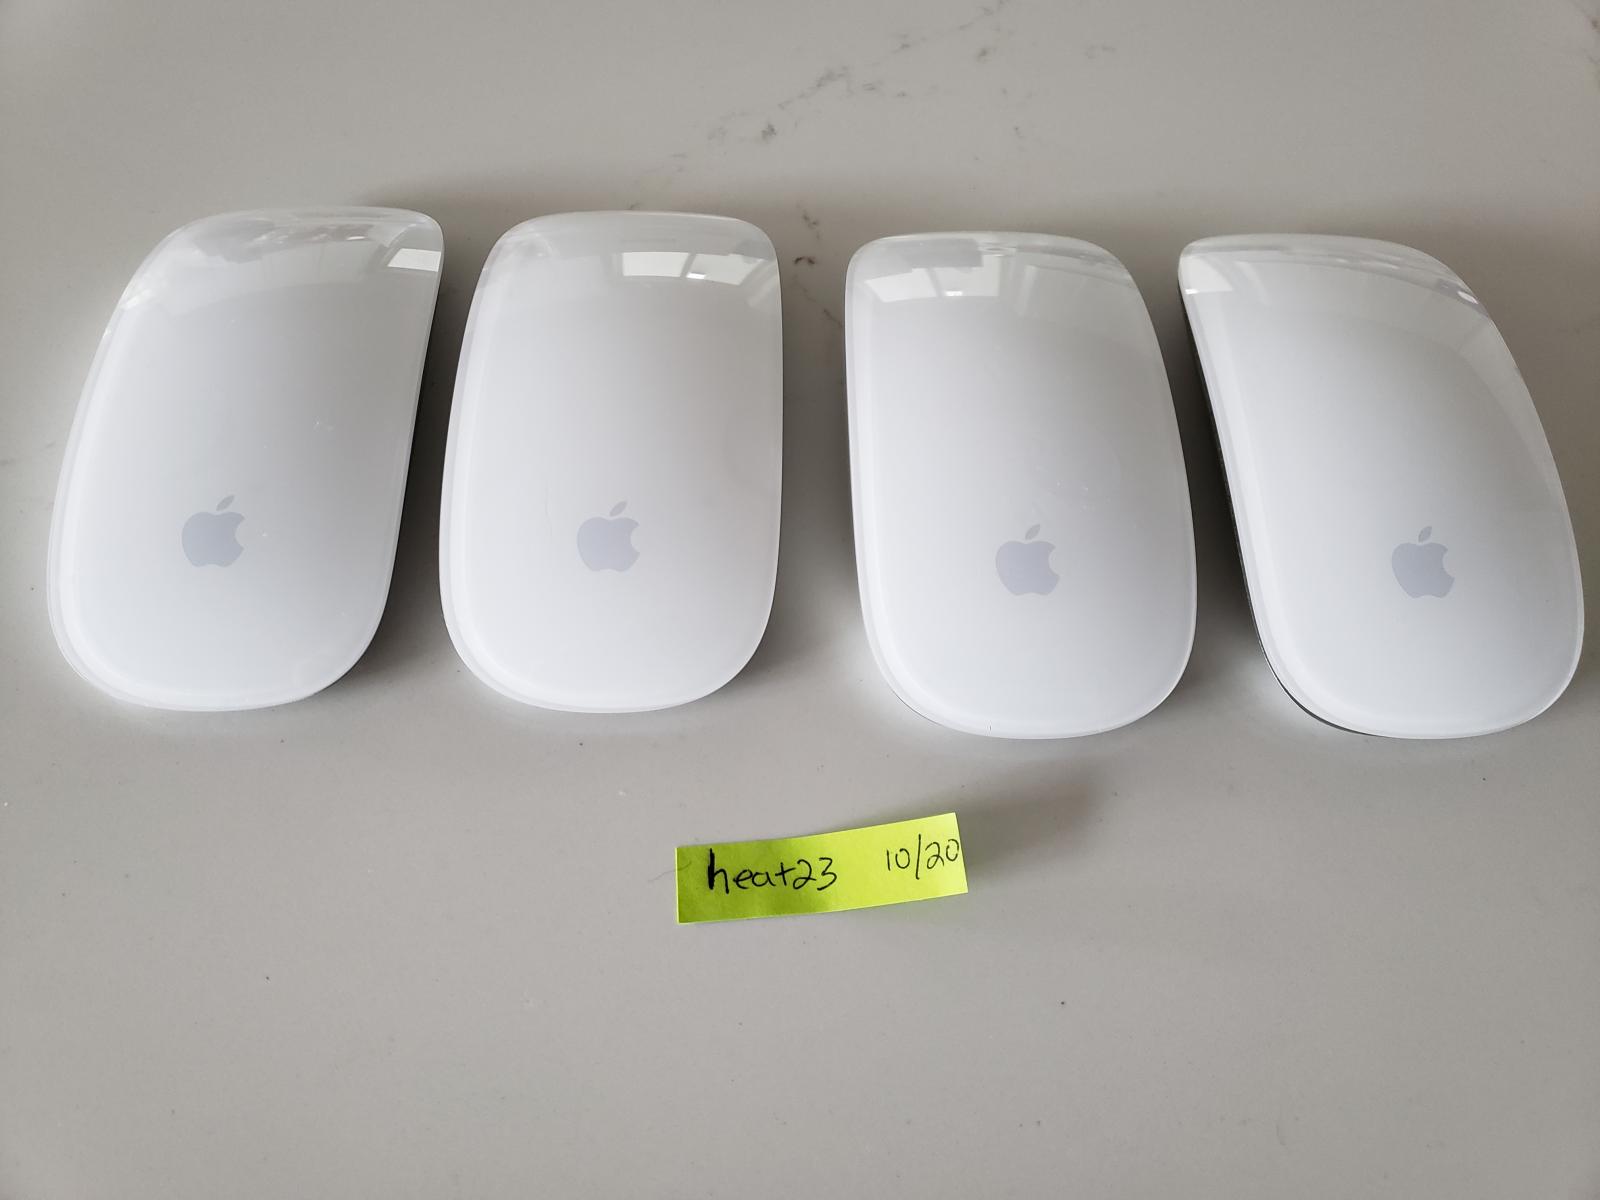 For sale Apple Magic Mouse (Qty 4)